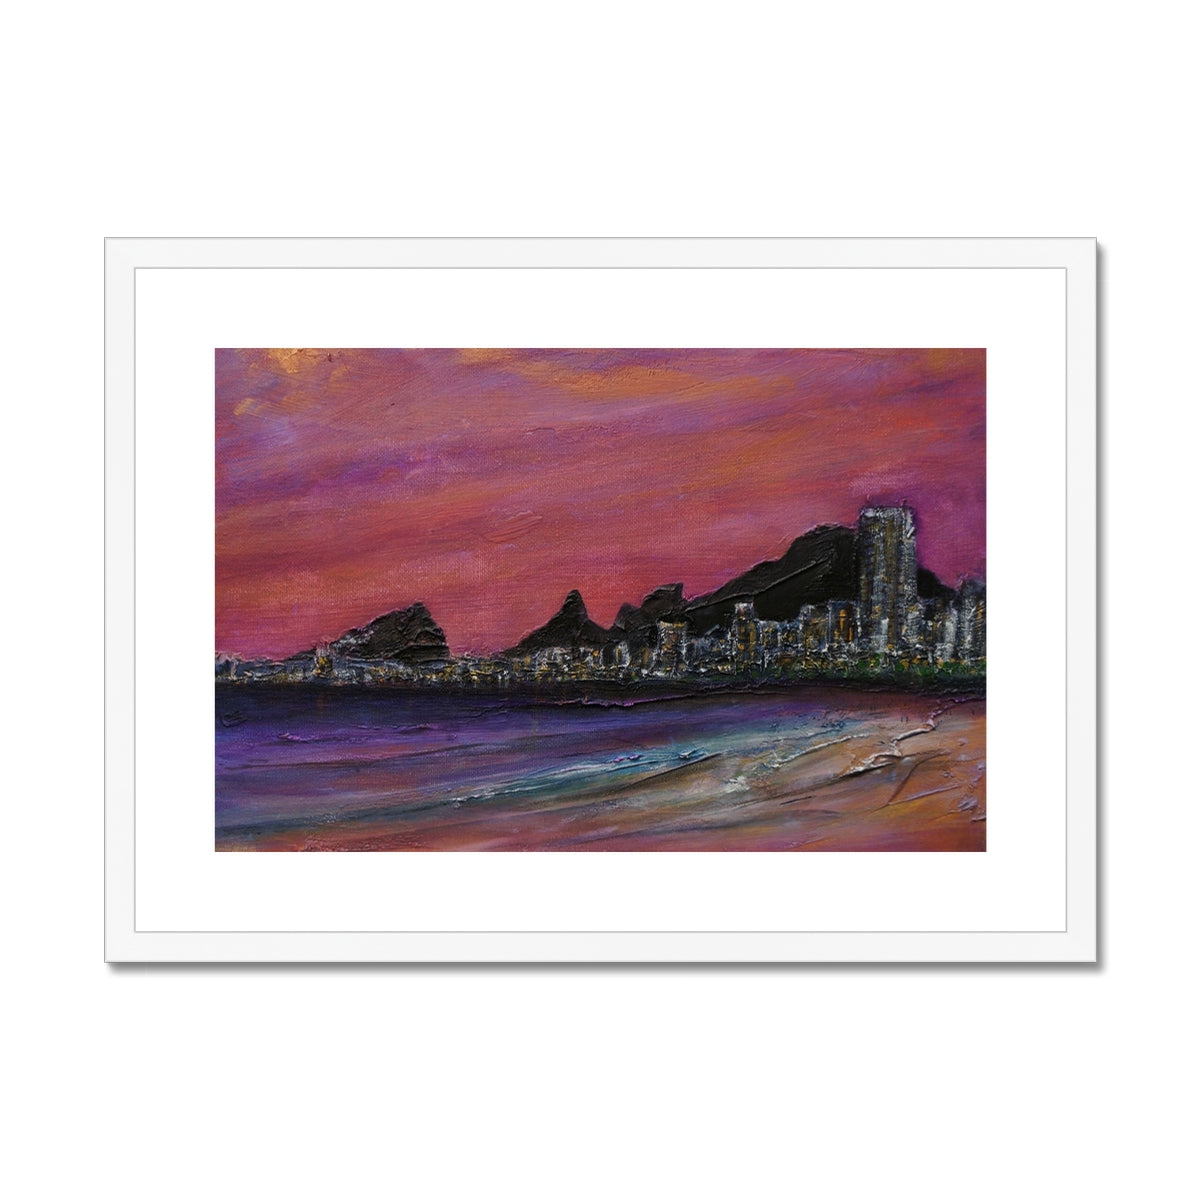 Copacabana Beach Dusk Painting | Framed & Mounted Prints From Scotland-Framed & Mounted Prints-World Art Gallery-A2 Landscape-White Frame-Paintings, Prints, Homeware, Art Gifts From Scotland By Scottish Artist Kevin Hunter